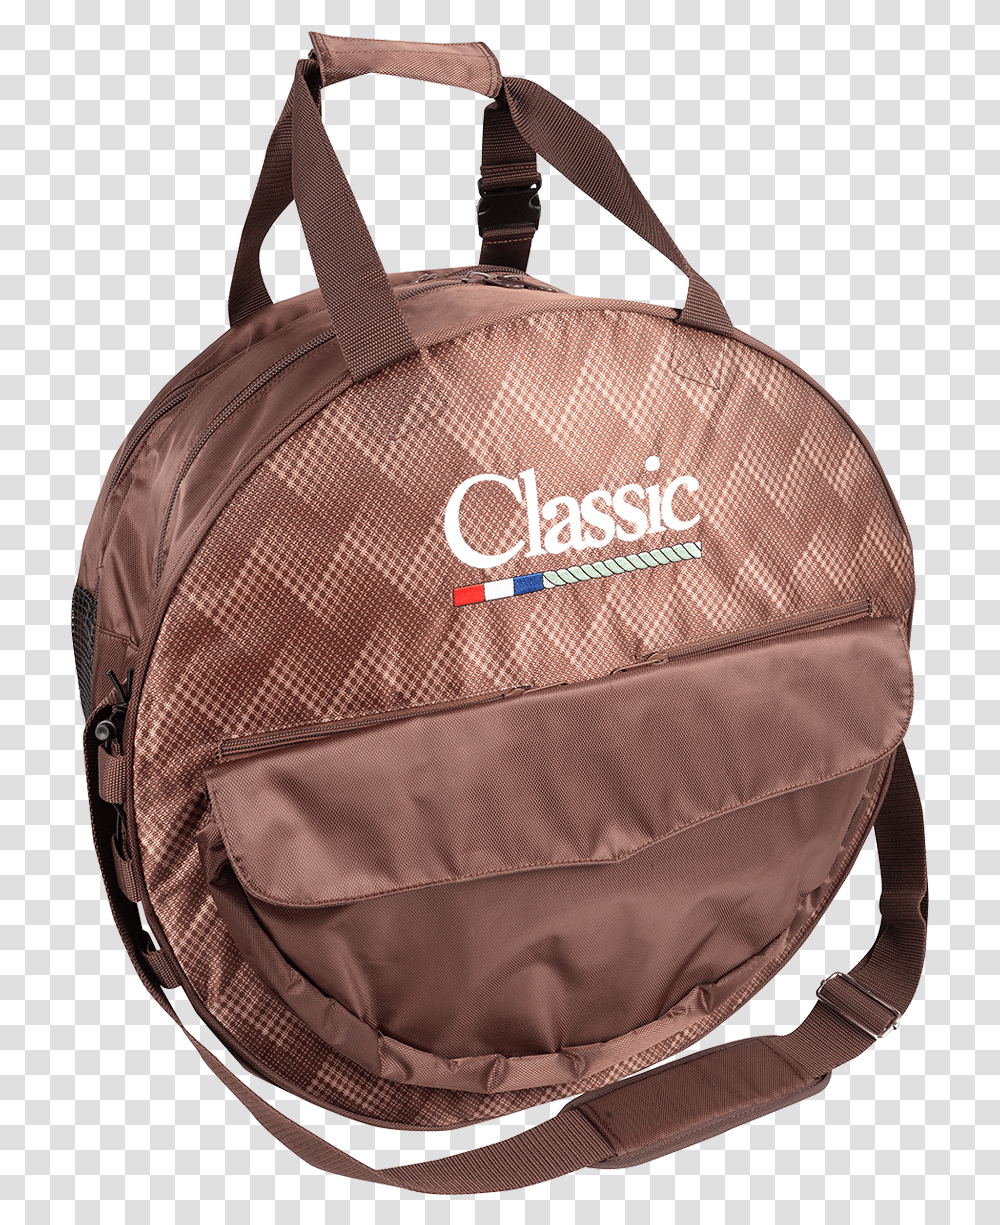 Classic Ropes Deluxe Rope Bag Checkerchocolate Bolsa De Laco Classic, Backpack, Tote Bag, Canvas Transparent Png